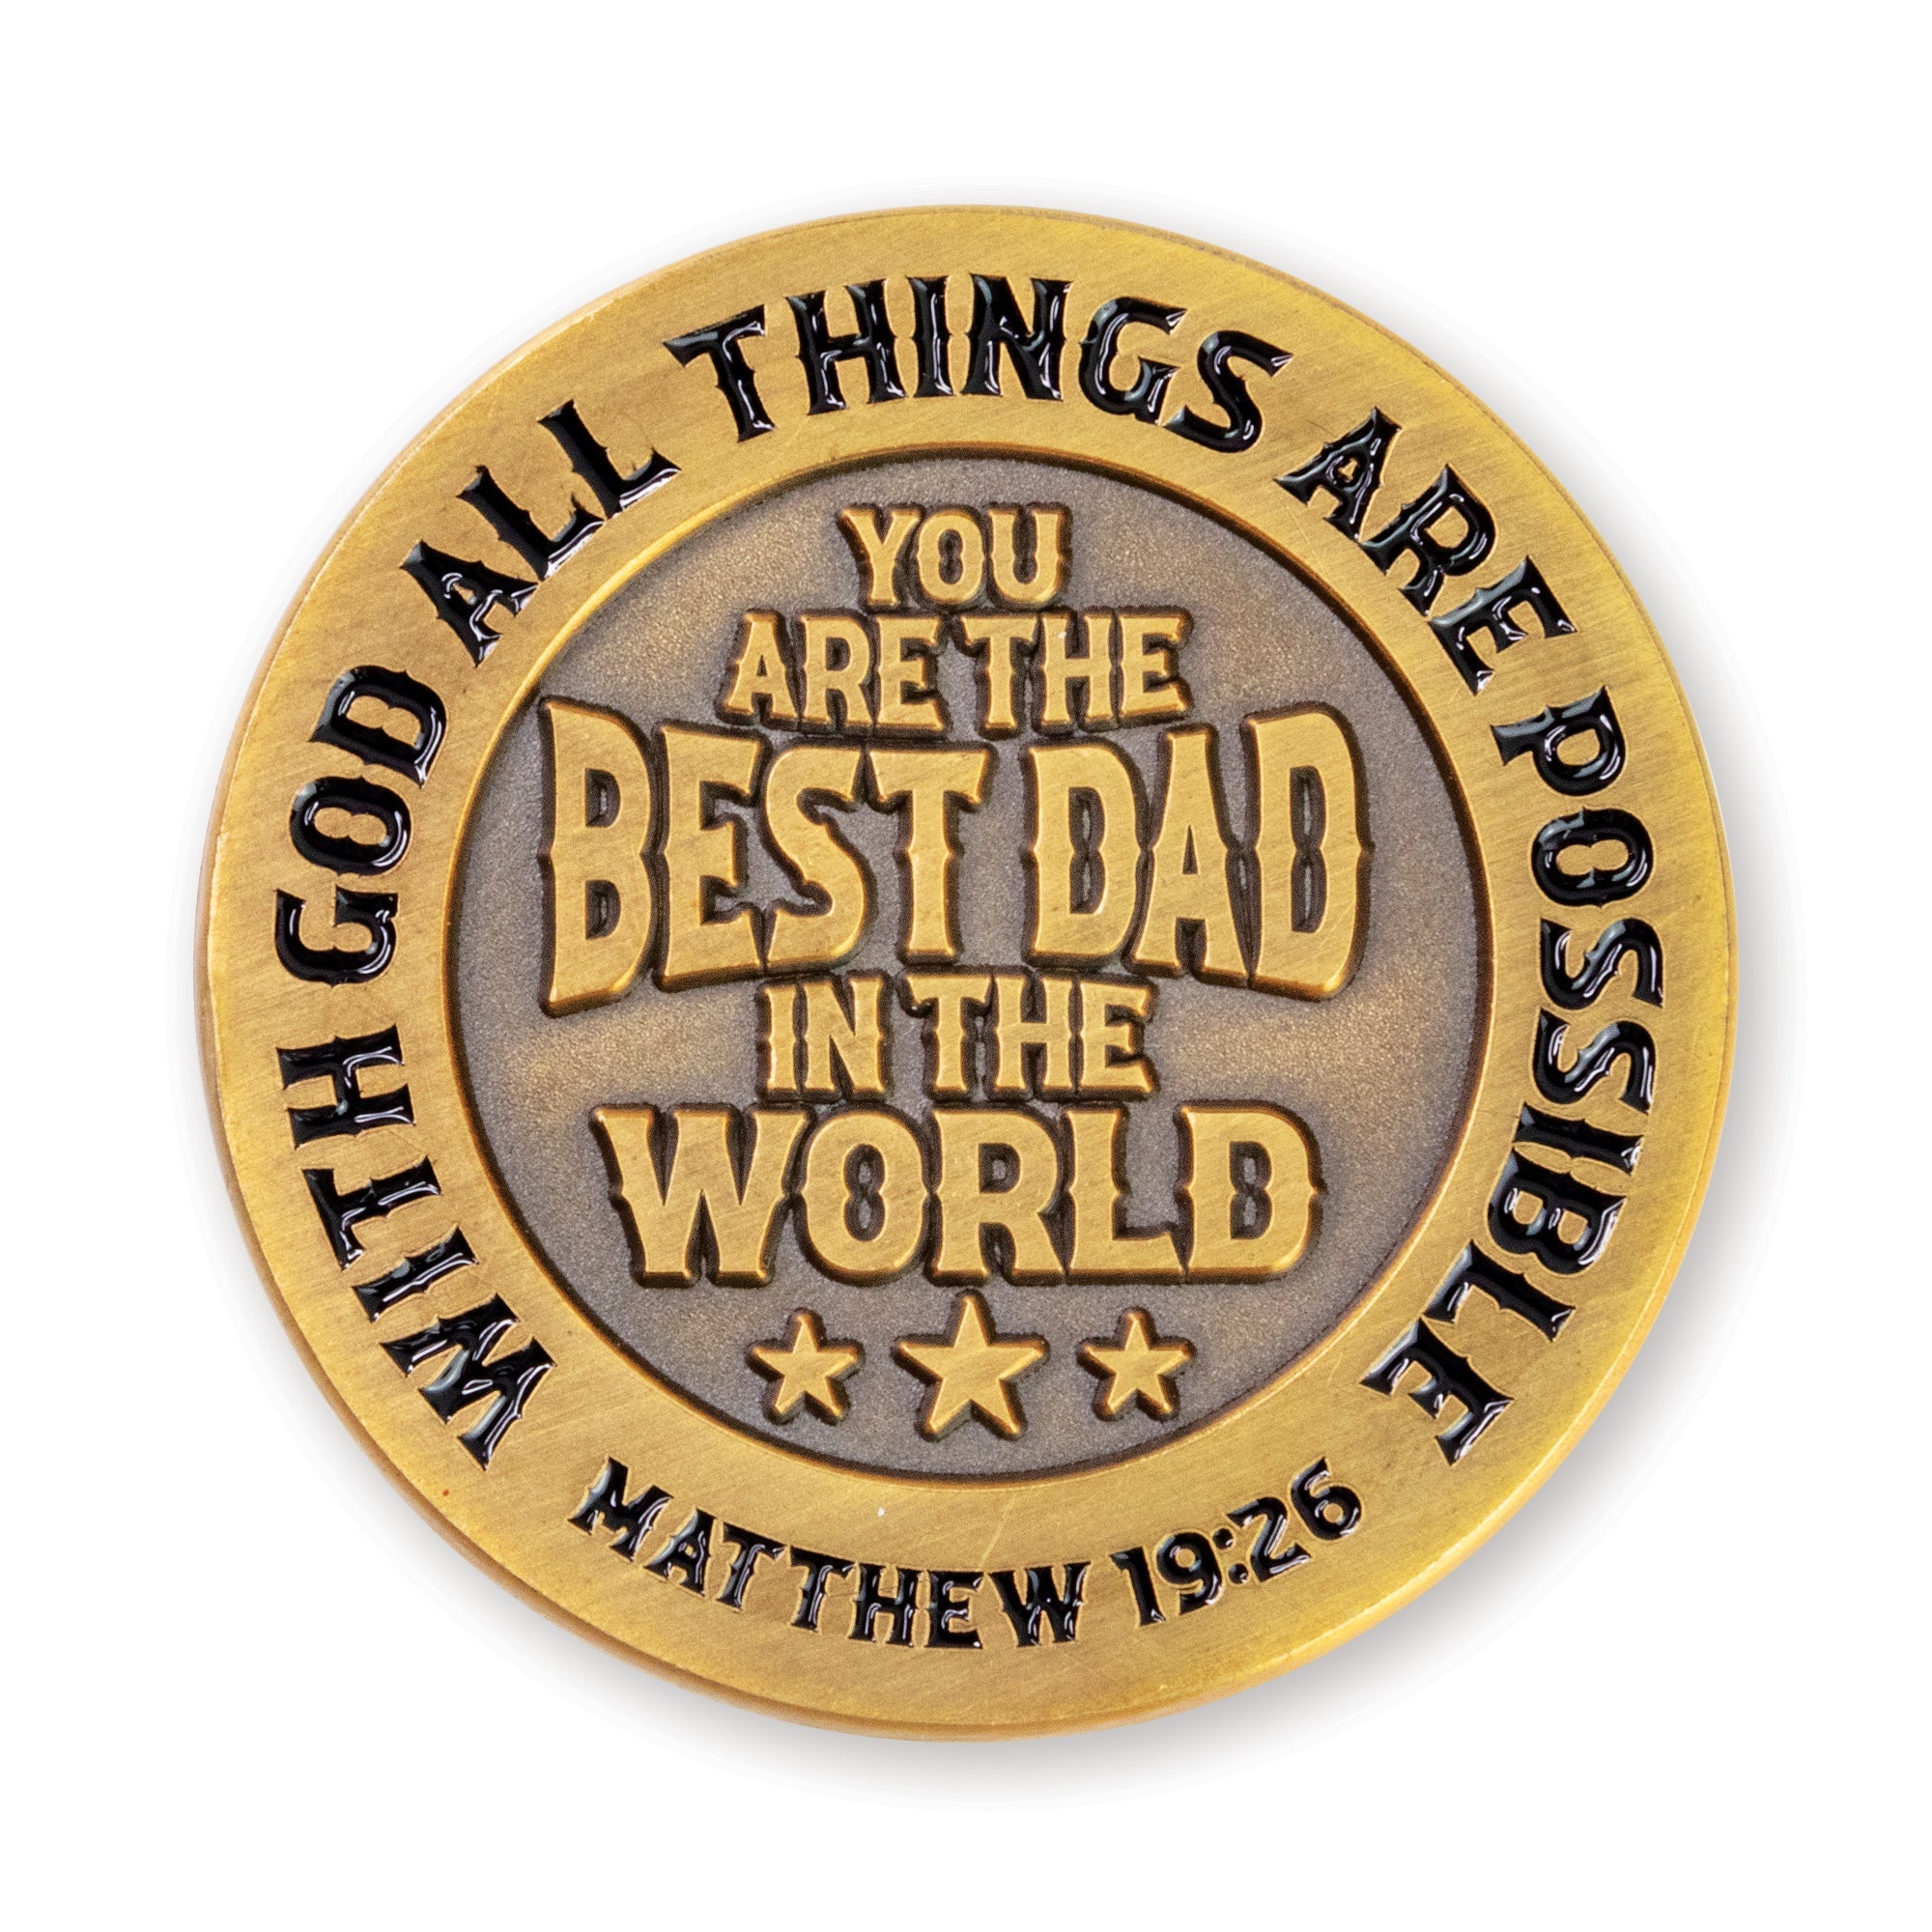 View of the back of the Dad Birthday gift challenge coin